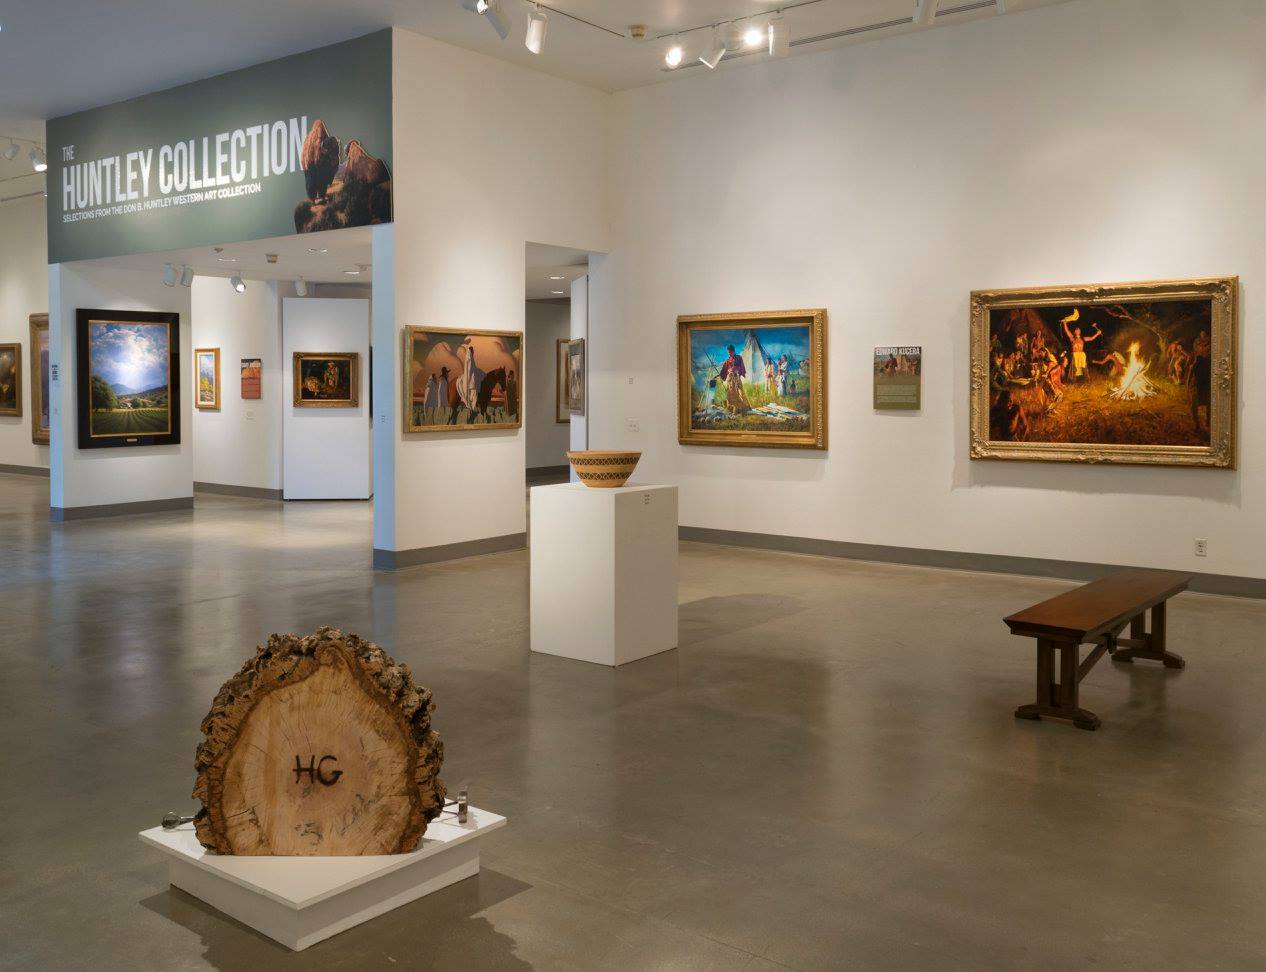 Installation View, Front of Gallery, Exhibition: "Don B. Huntley College of Ag. Naming Ceremony & ENV Exhibition", Nov. 18, 2016 to Nov. 19, 2016